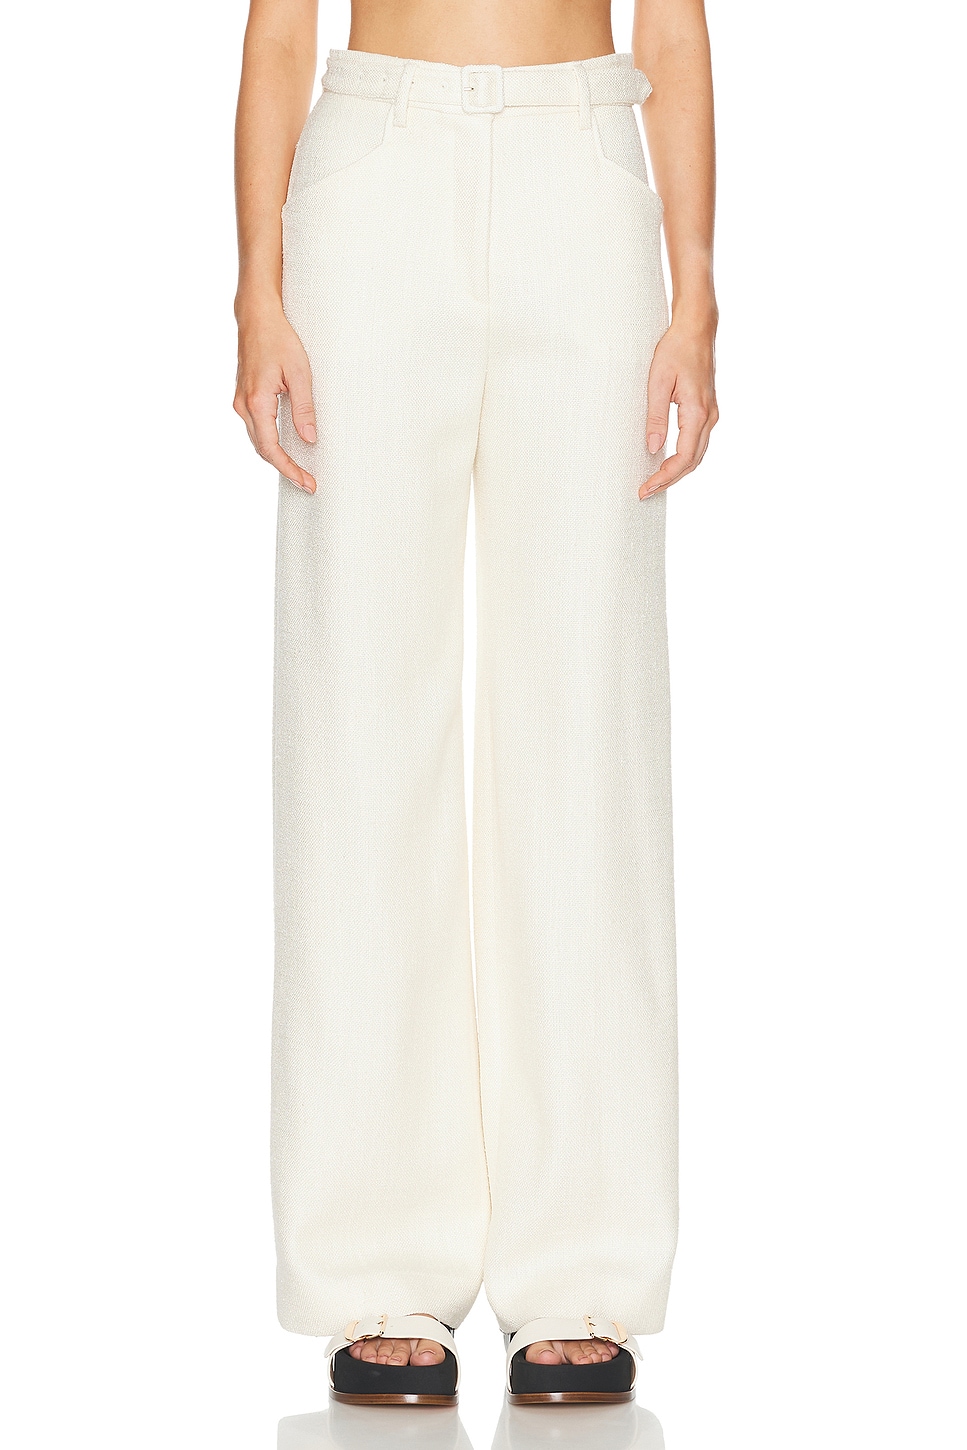 Image 1 of Gabriela Hearst Norman Pant in Ivory